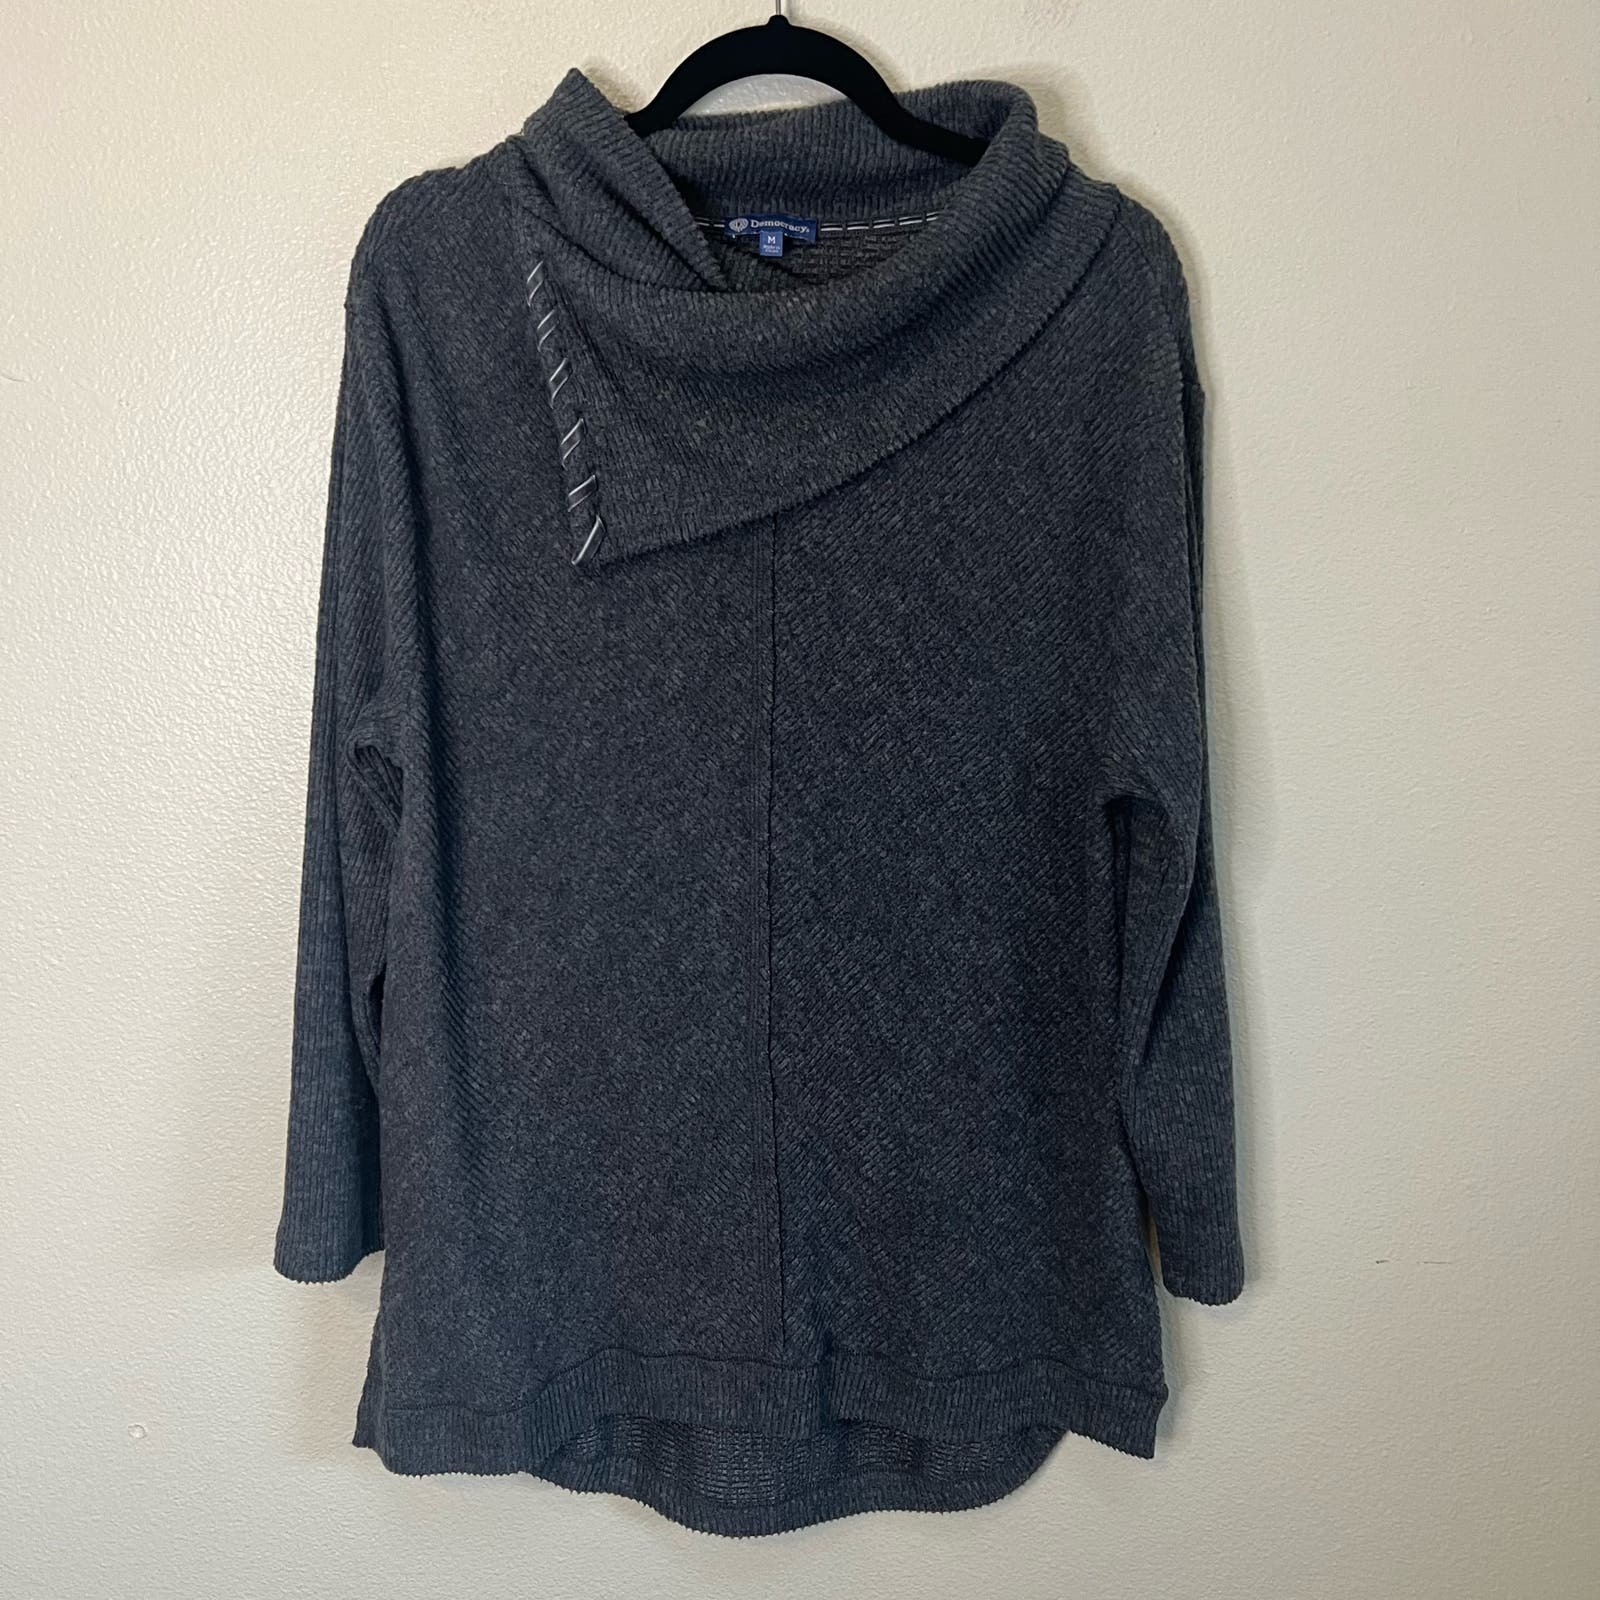 Cheap Democracy Gray Cowl Neck Sweater Size M KSIvRvNfe all for you